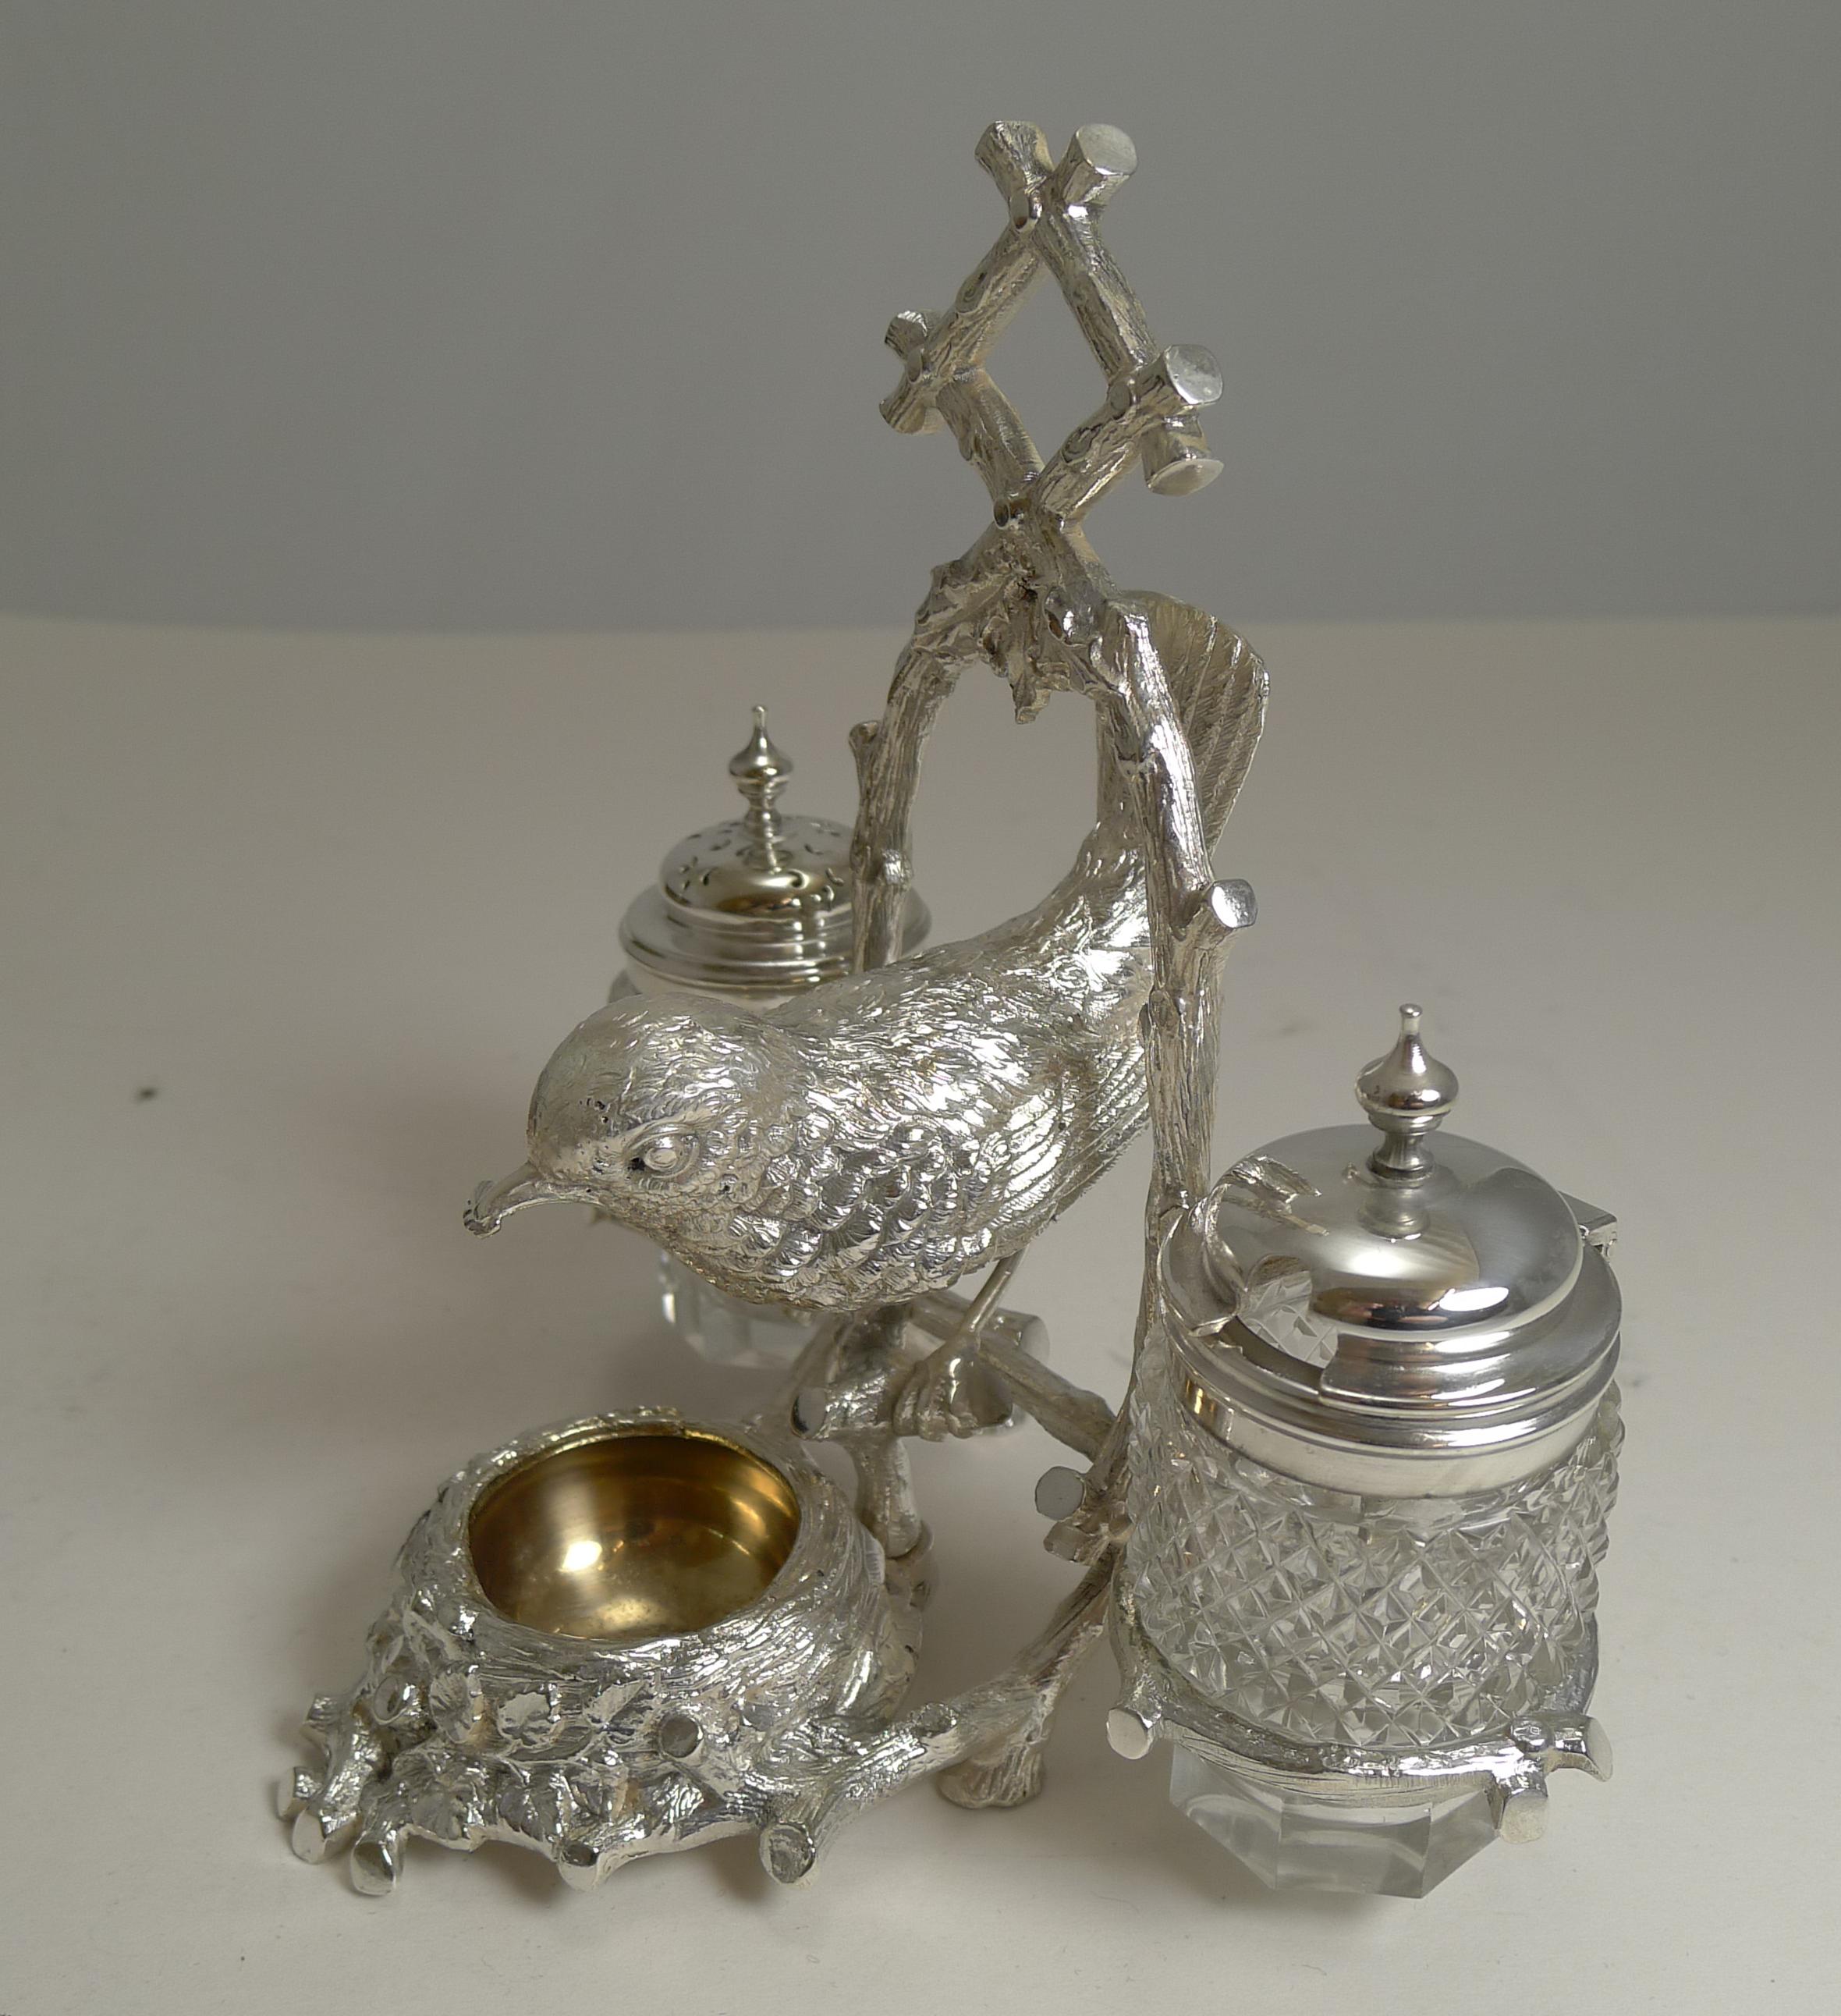 An absolutely charming and unusual novelty table cruet made from English silver plate with a full signature on the underside for the well renowned silversmith, Fenton Brothers of Sheffield.

The naturalistic frame with its integral handle holds